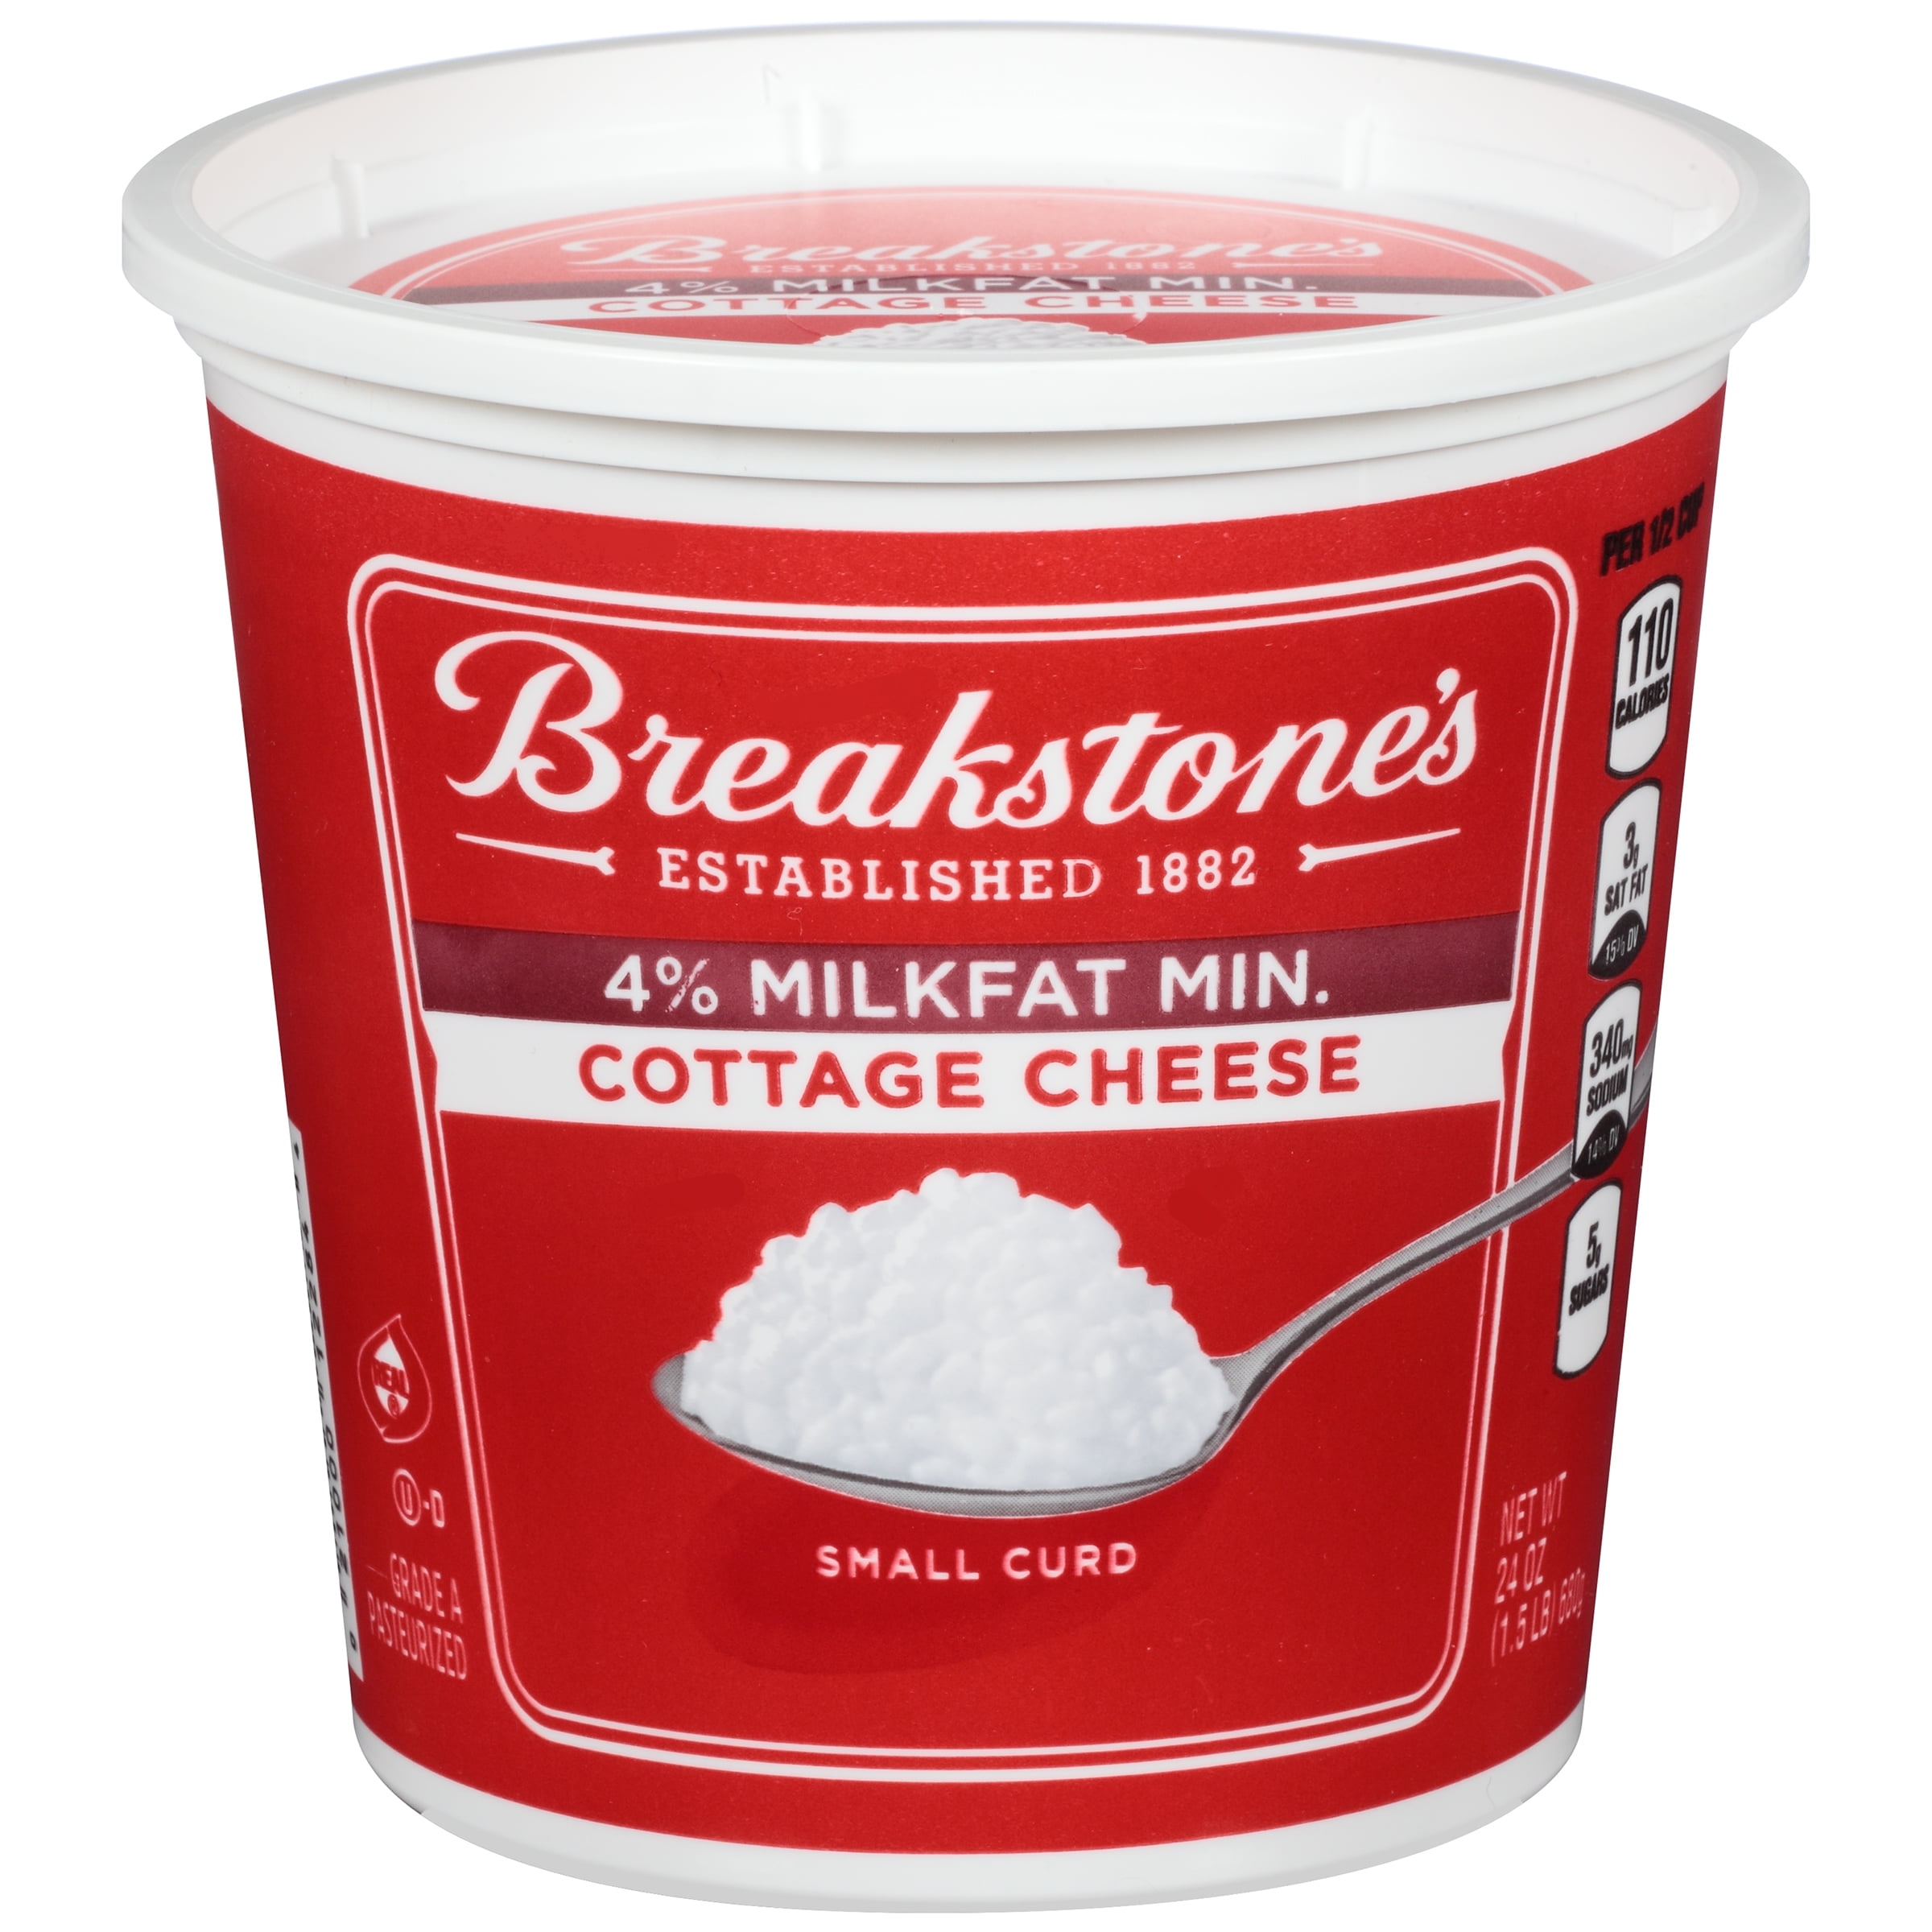 Breakstone S Small Curd 4 Milkfat Cottage Cheese 24 Oz Tub